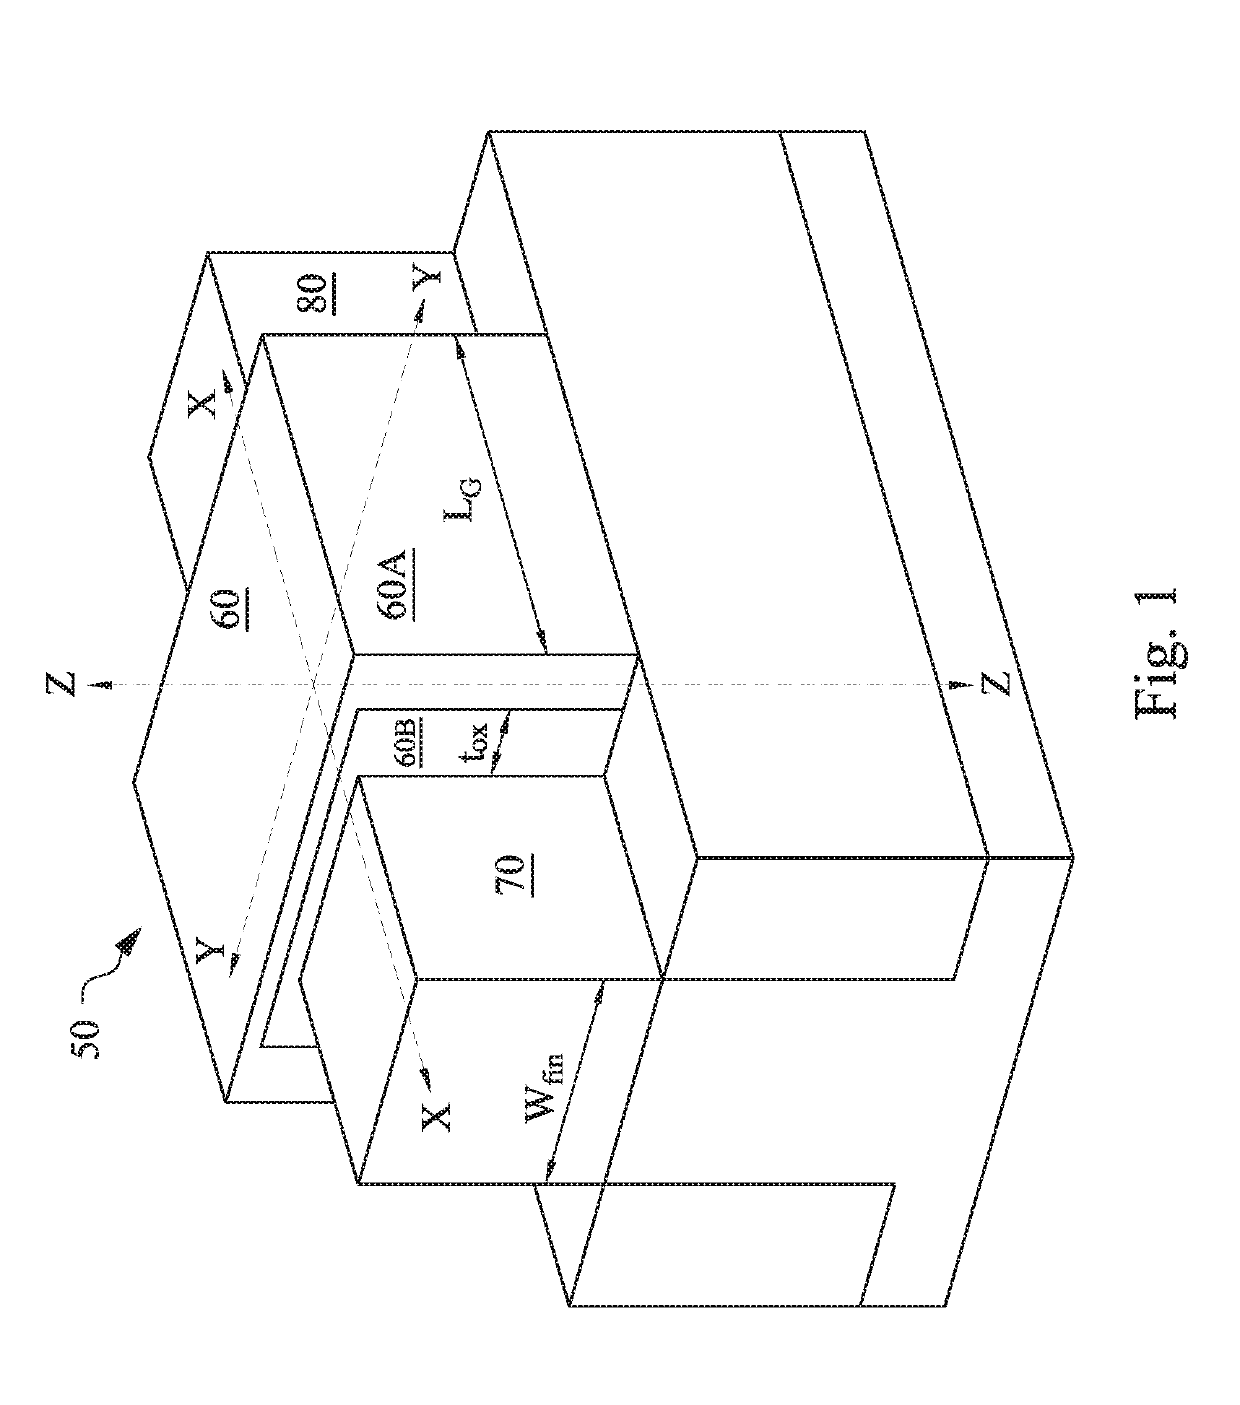 Isolation structure having different distances to adjacent finfet devices